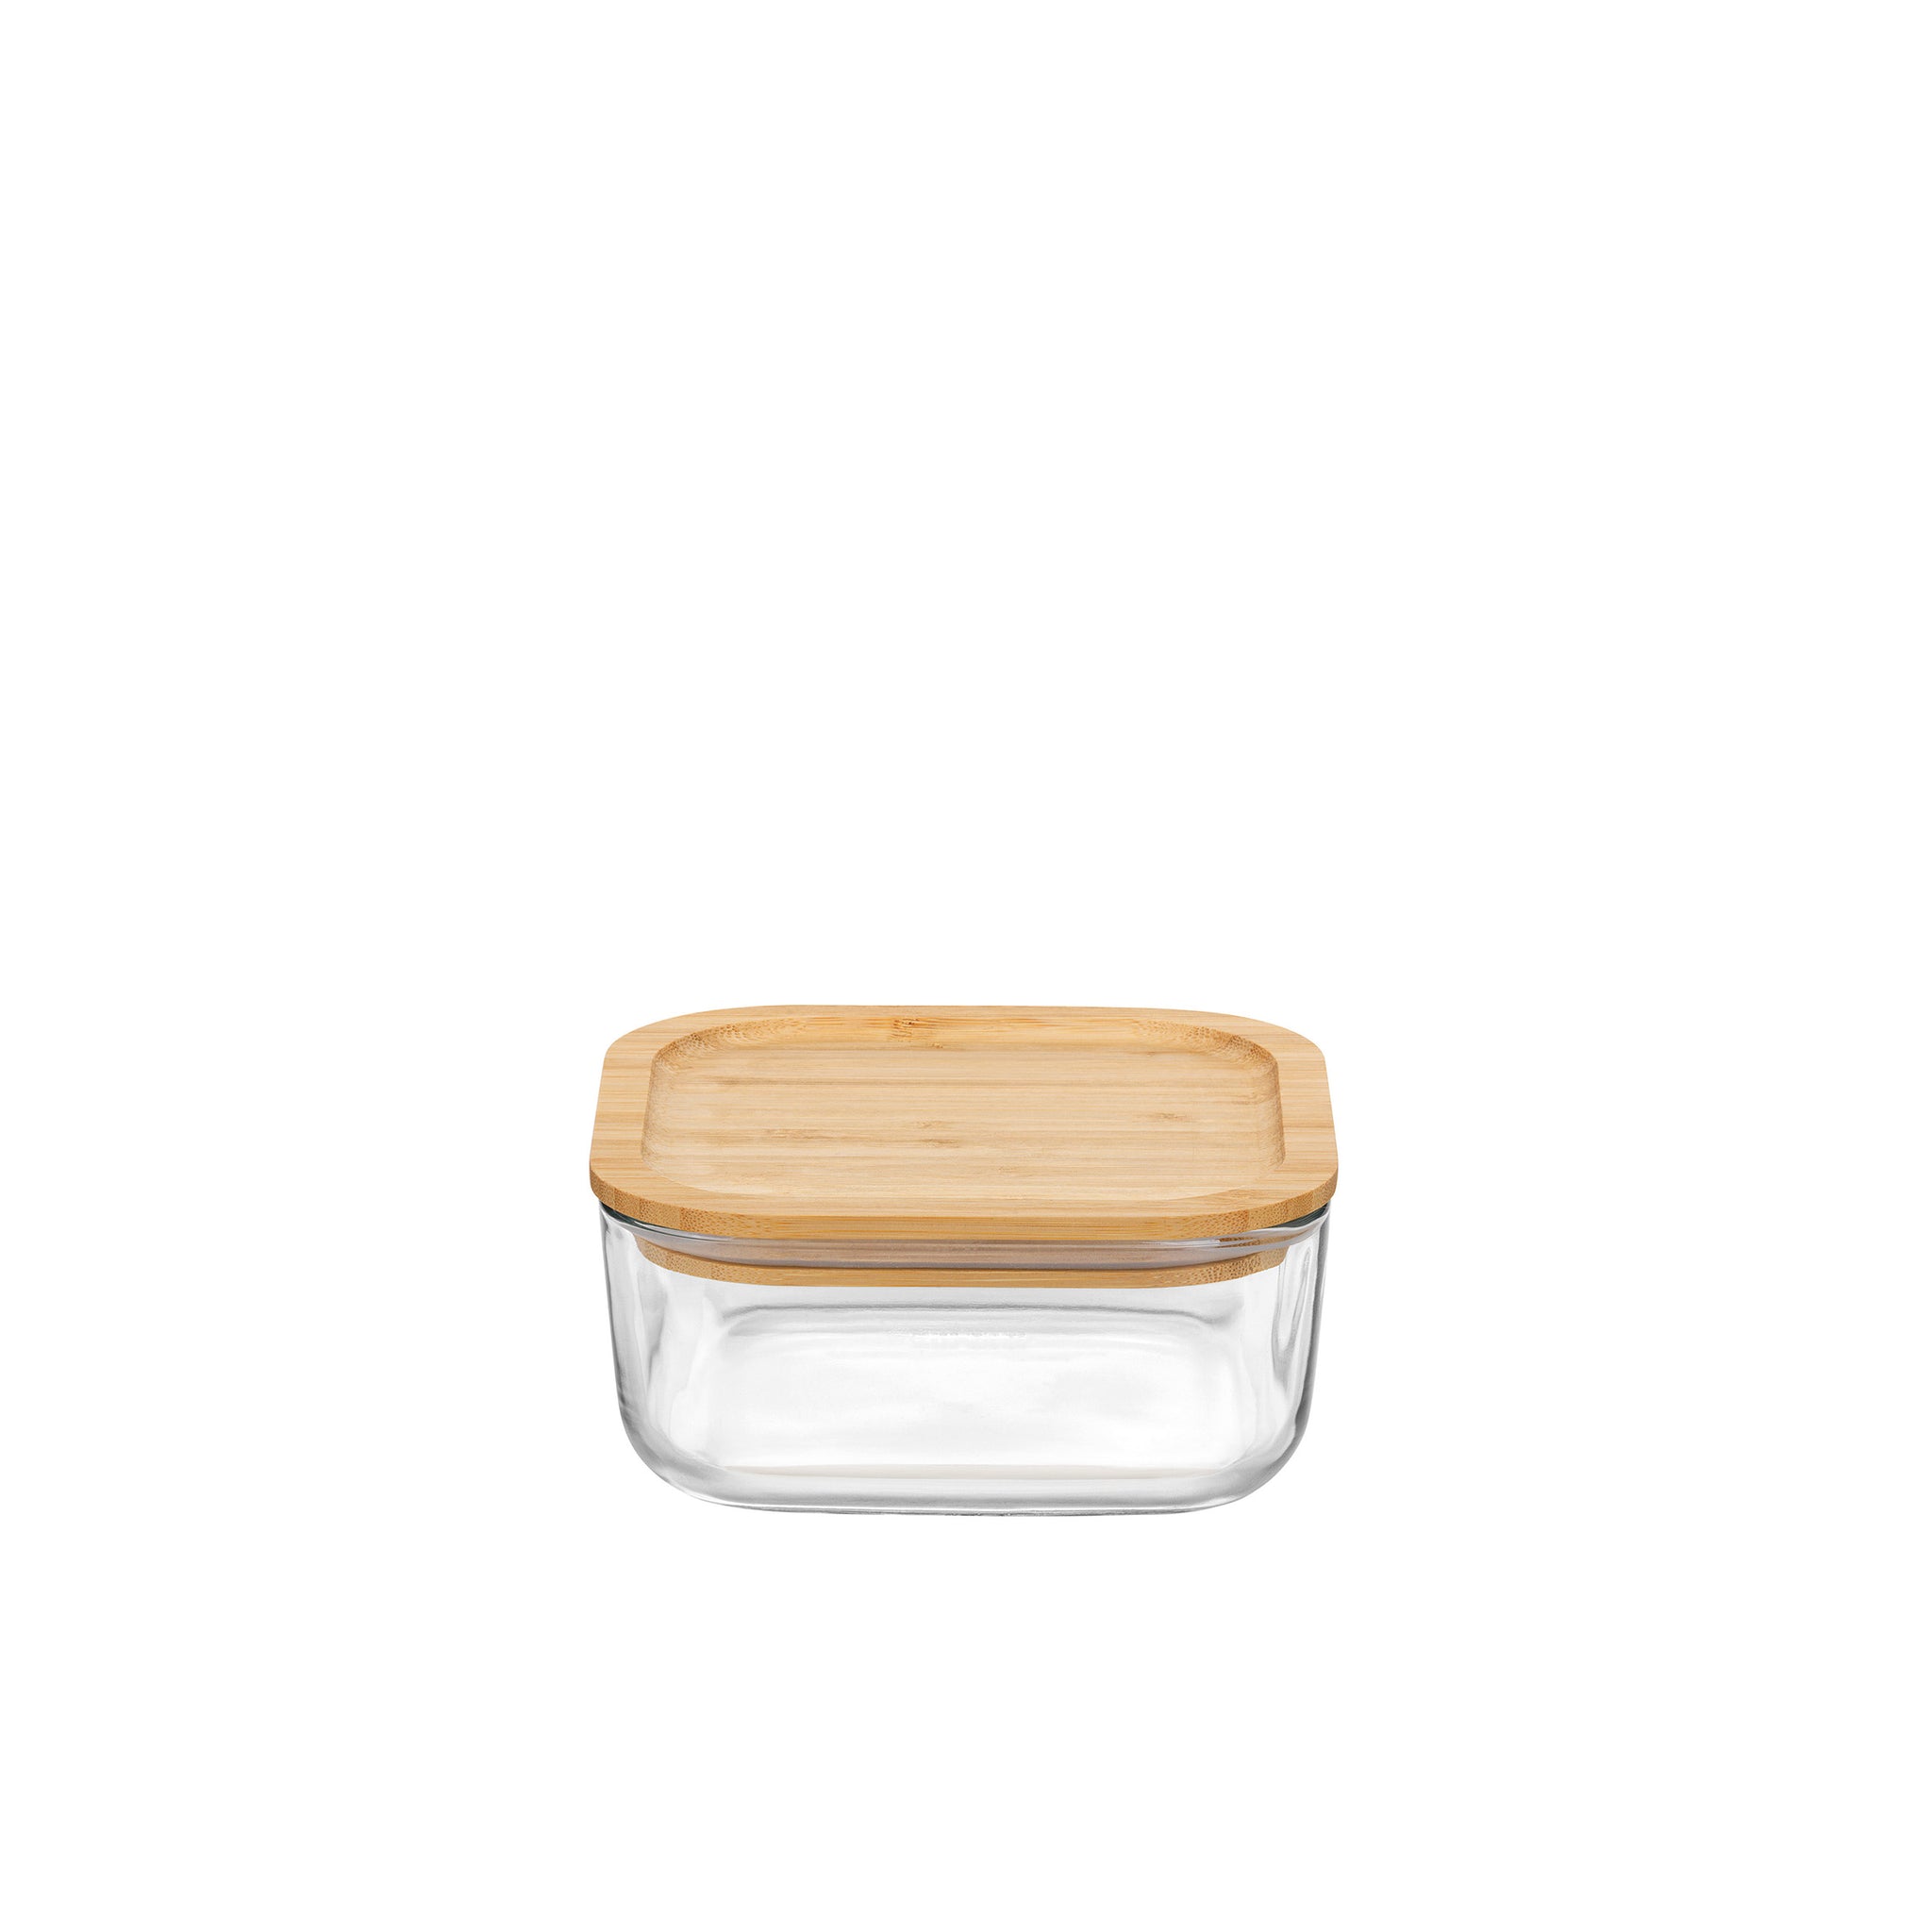 Frigoverre 11.75 oz. Bamboo Square Food Storage Container (Set of 12)